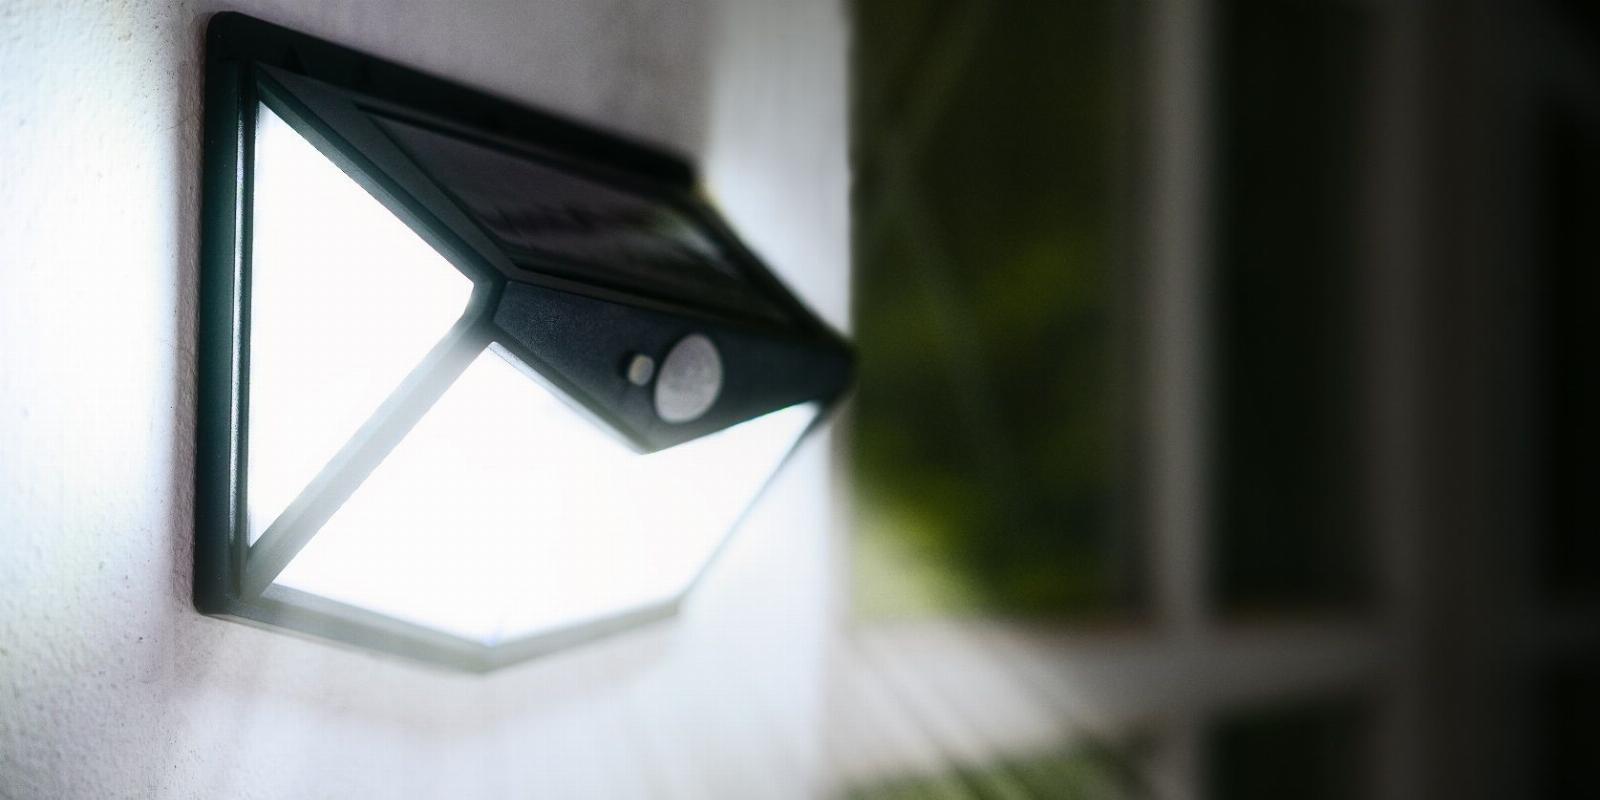 What Is a Motion Sensor, and How Does It Work?